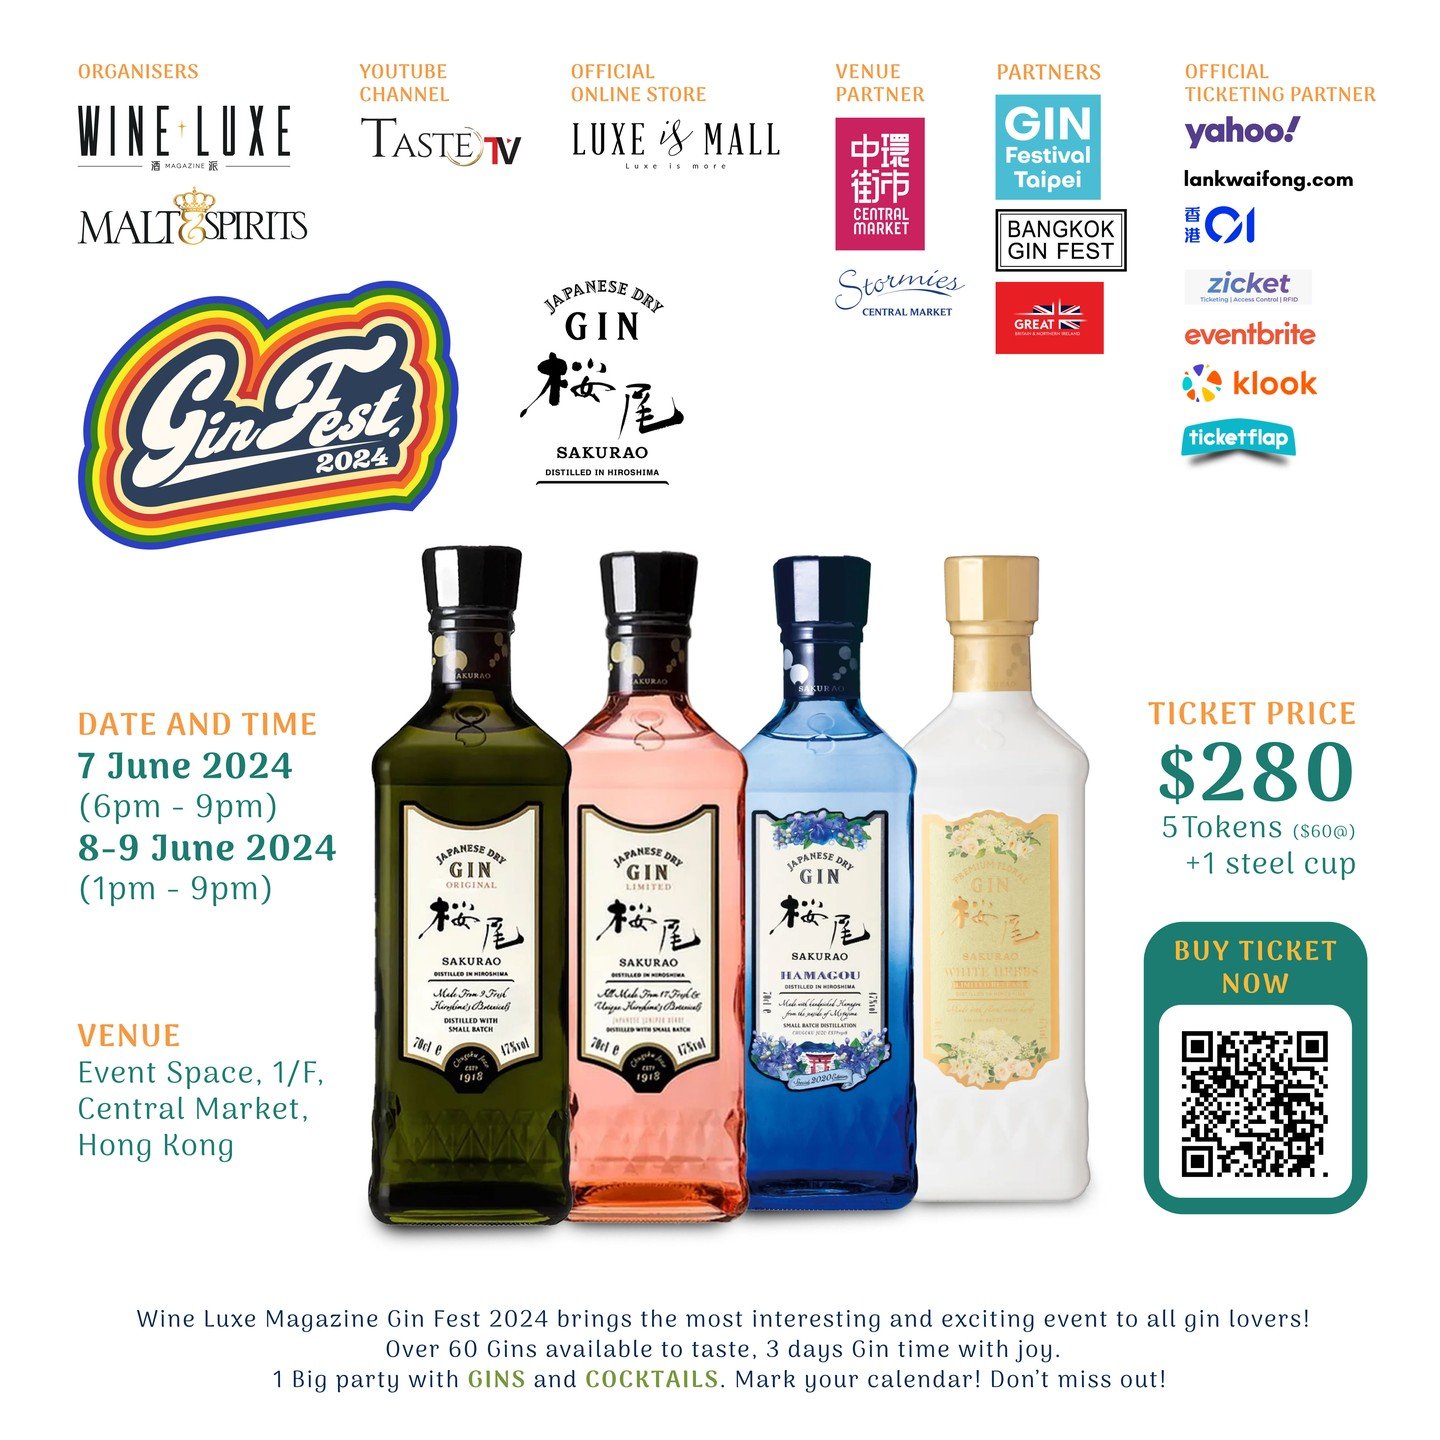 GIN FEST 2024 on the WORLD GIN DAY ‼️

Join us for GIN FEST 2024 on 7-9 June WORLD GIN DAY! Experience an extraordinary selection of GIN and Cocktails from around the globe at the Central Market.

Get your Tickets now for just HK$280 (Original: HK$30